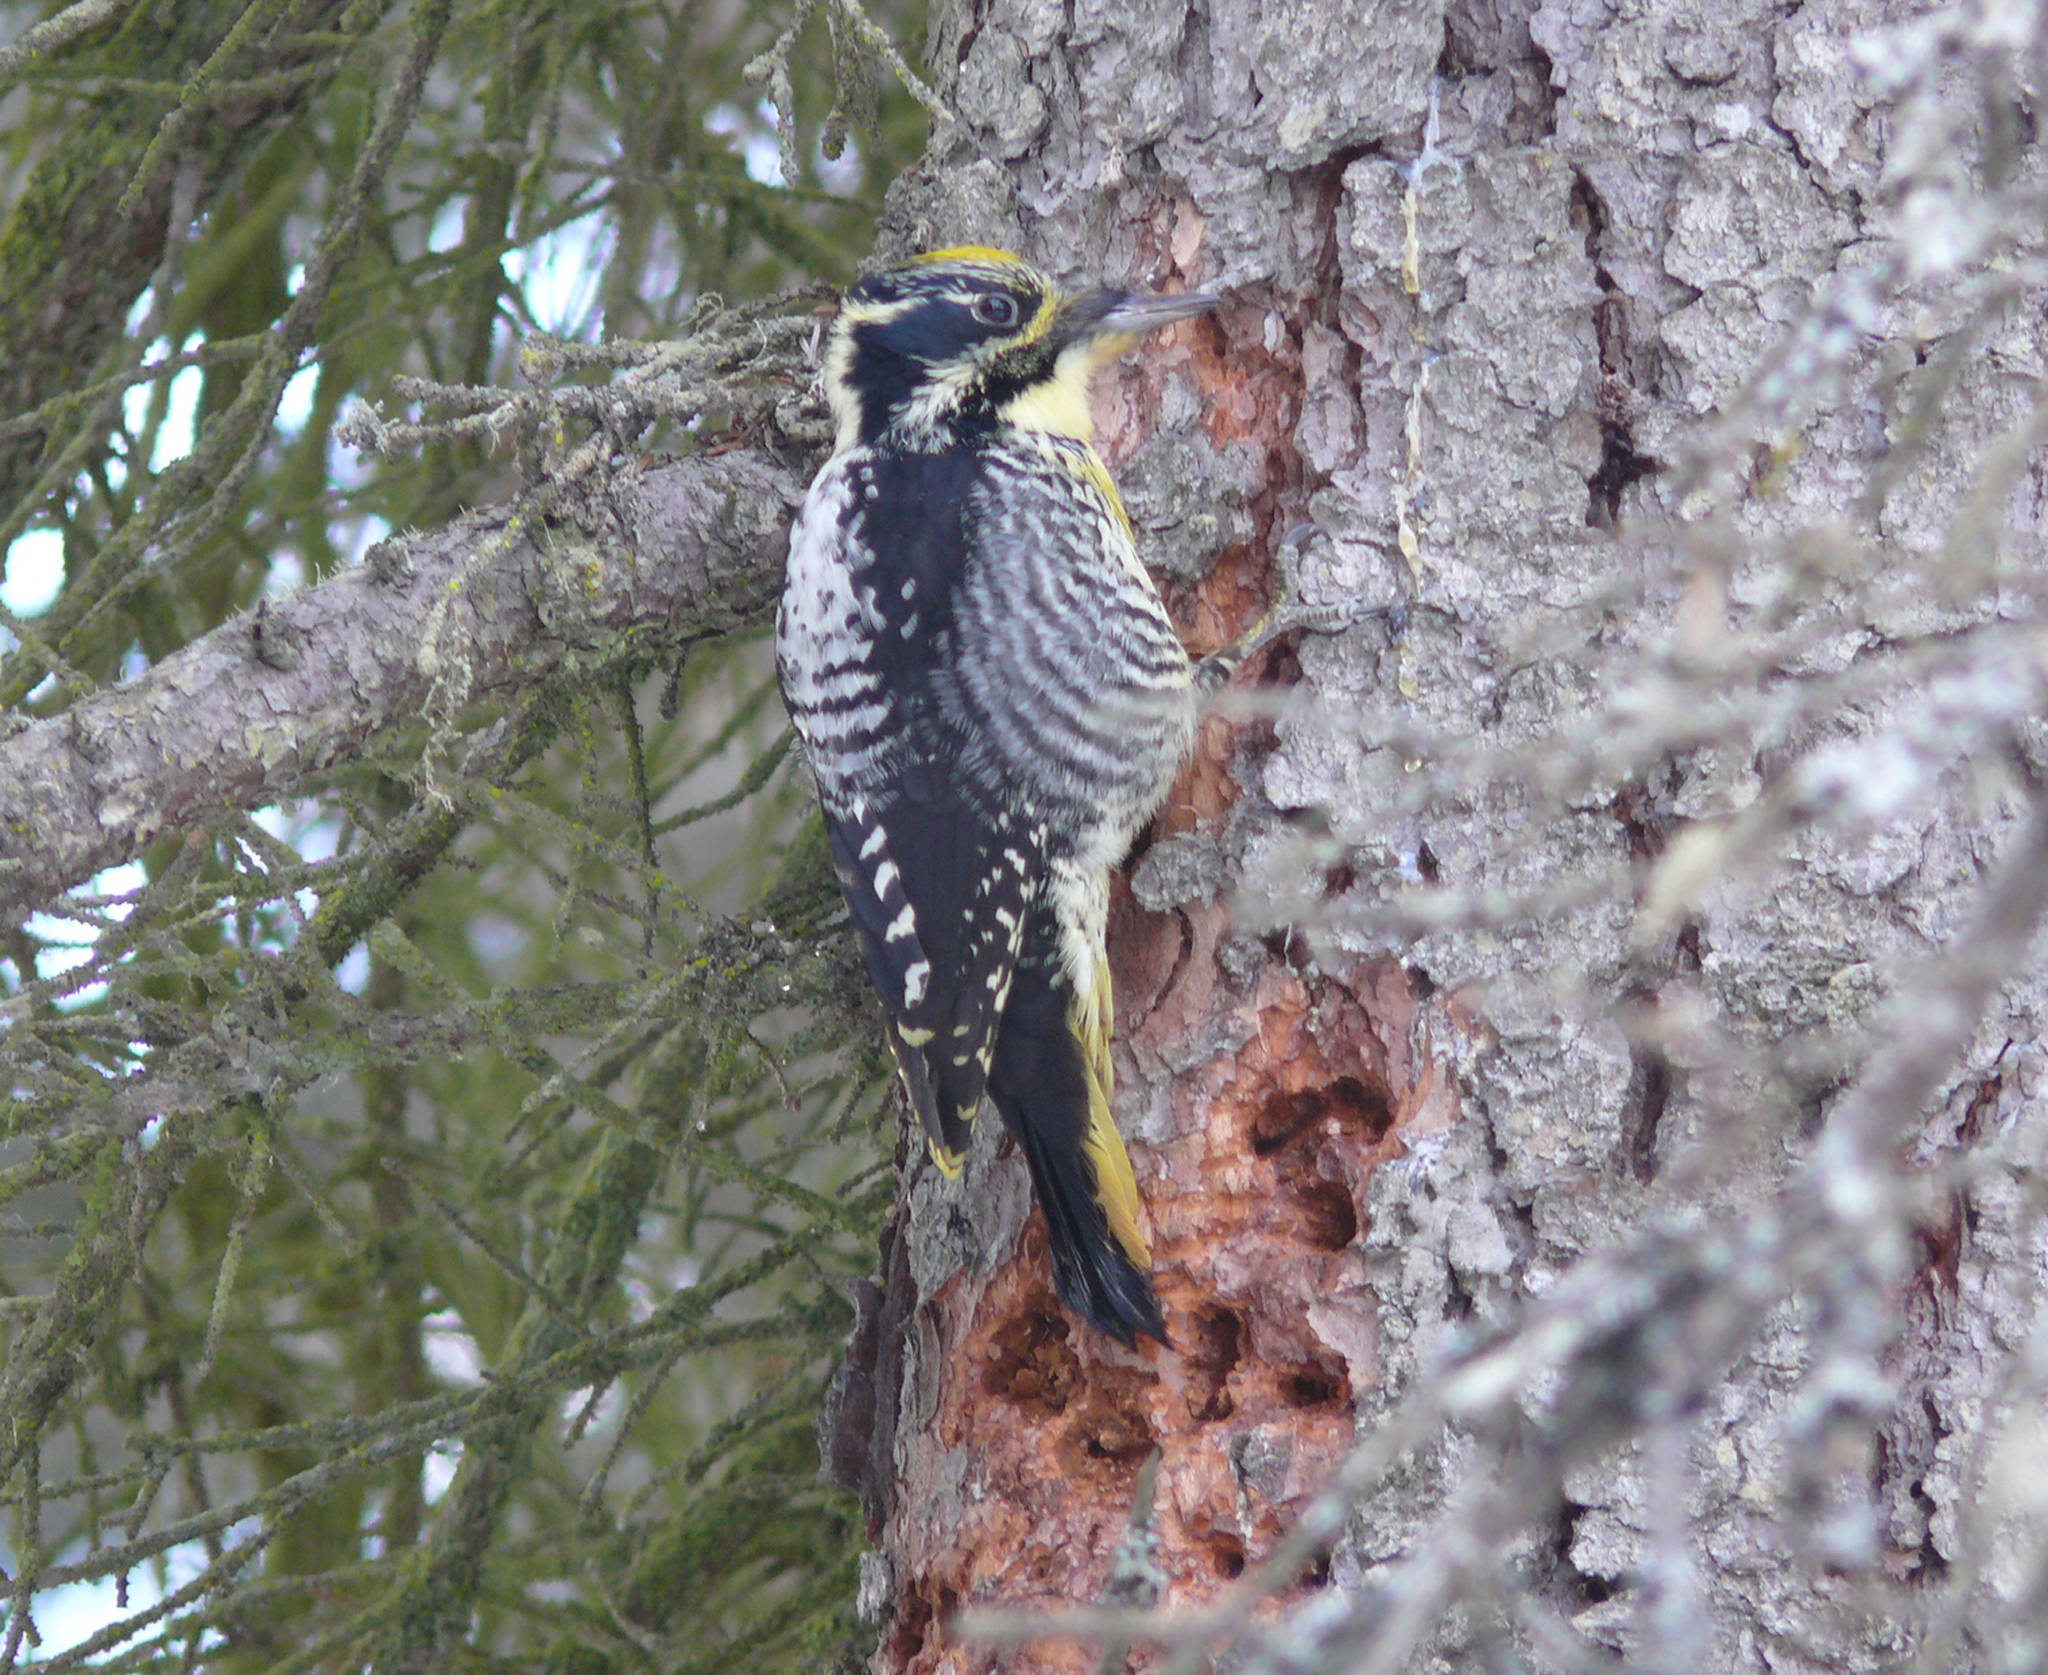 A three-toed woodpecker rattles away on a beetle-killed spruce. The yellow staining is apparent on the tail, wingtips, breast, and throat. The gold cap on its head is the normal coloration. (Matt Bowser, USFWS, Jan 28, 2017)